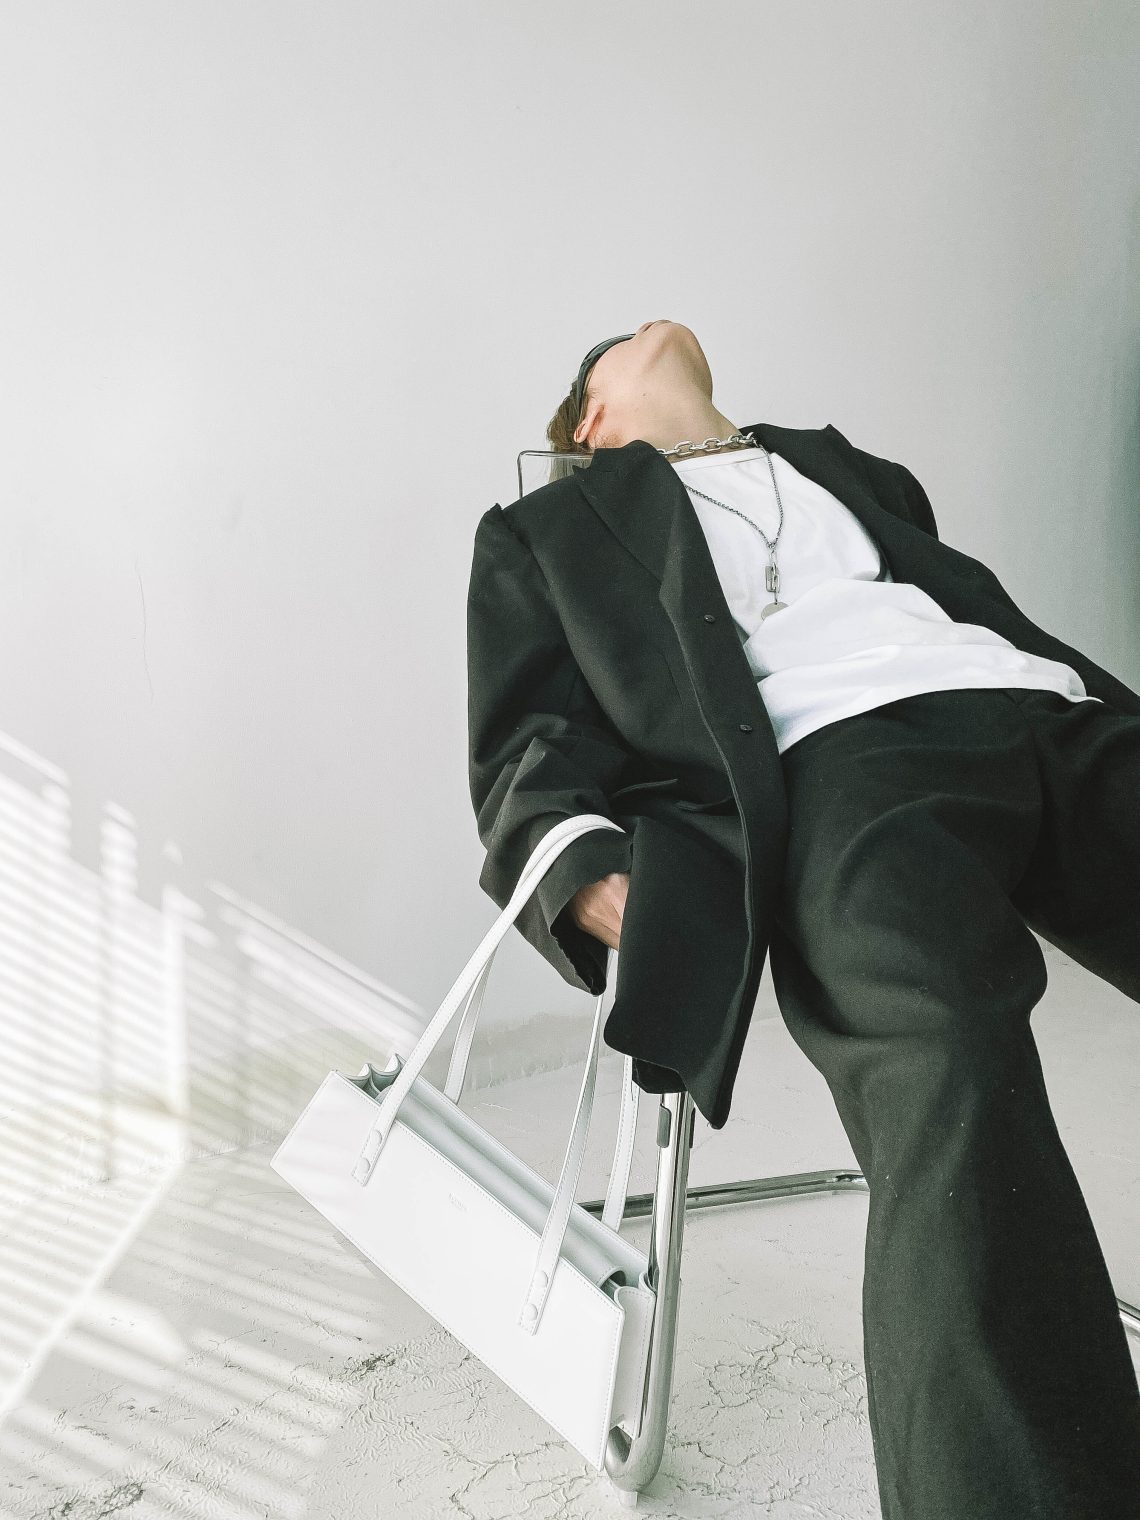 Stylish woman wearing suit lying on chair